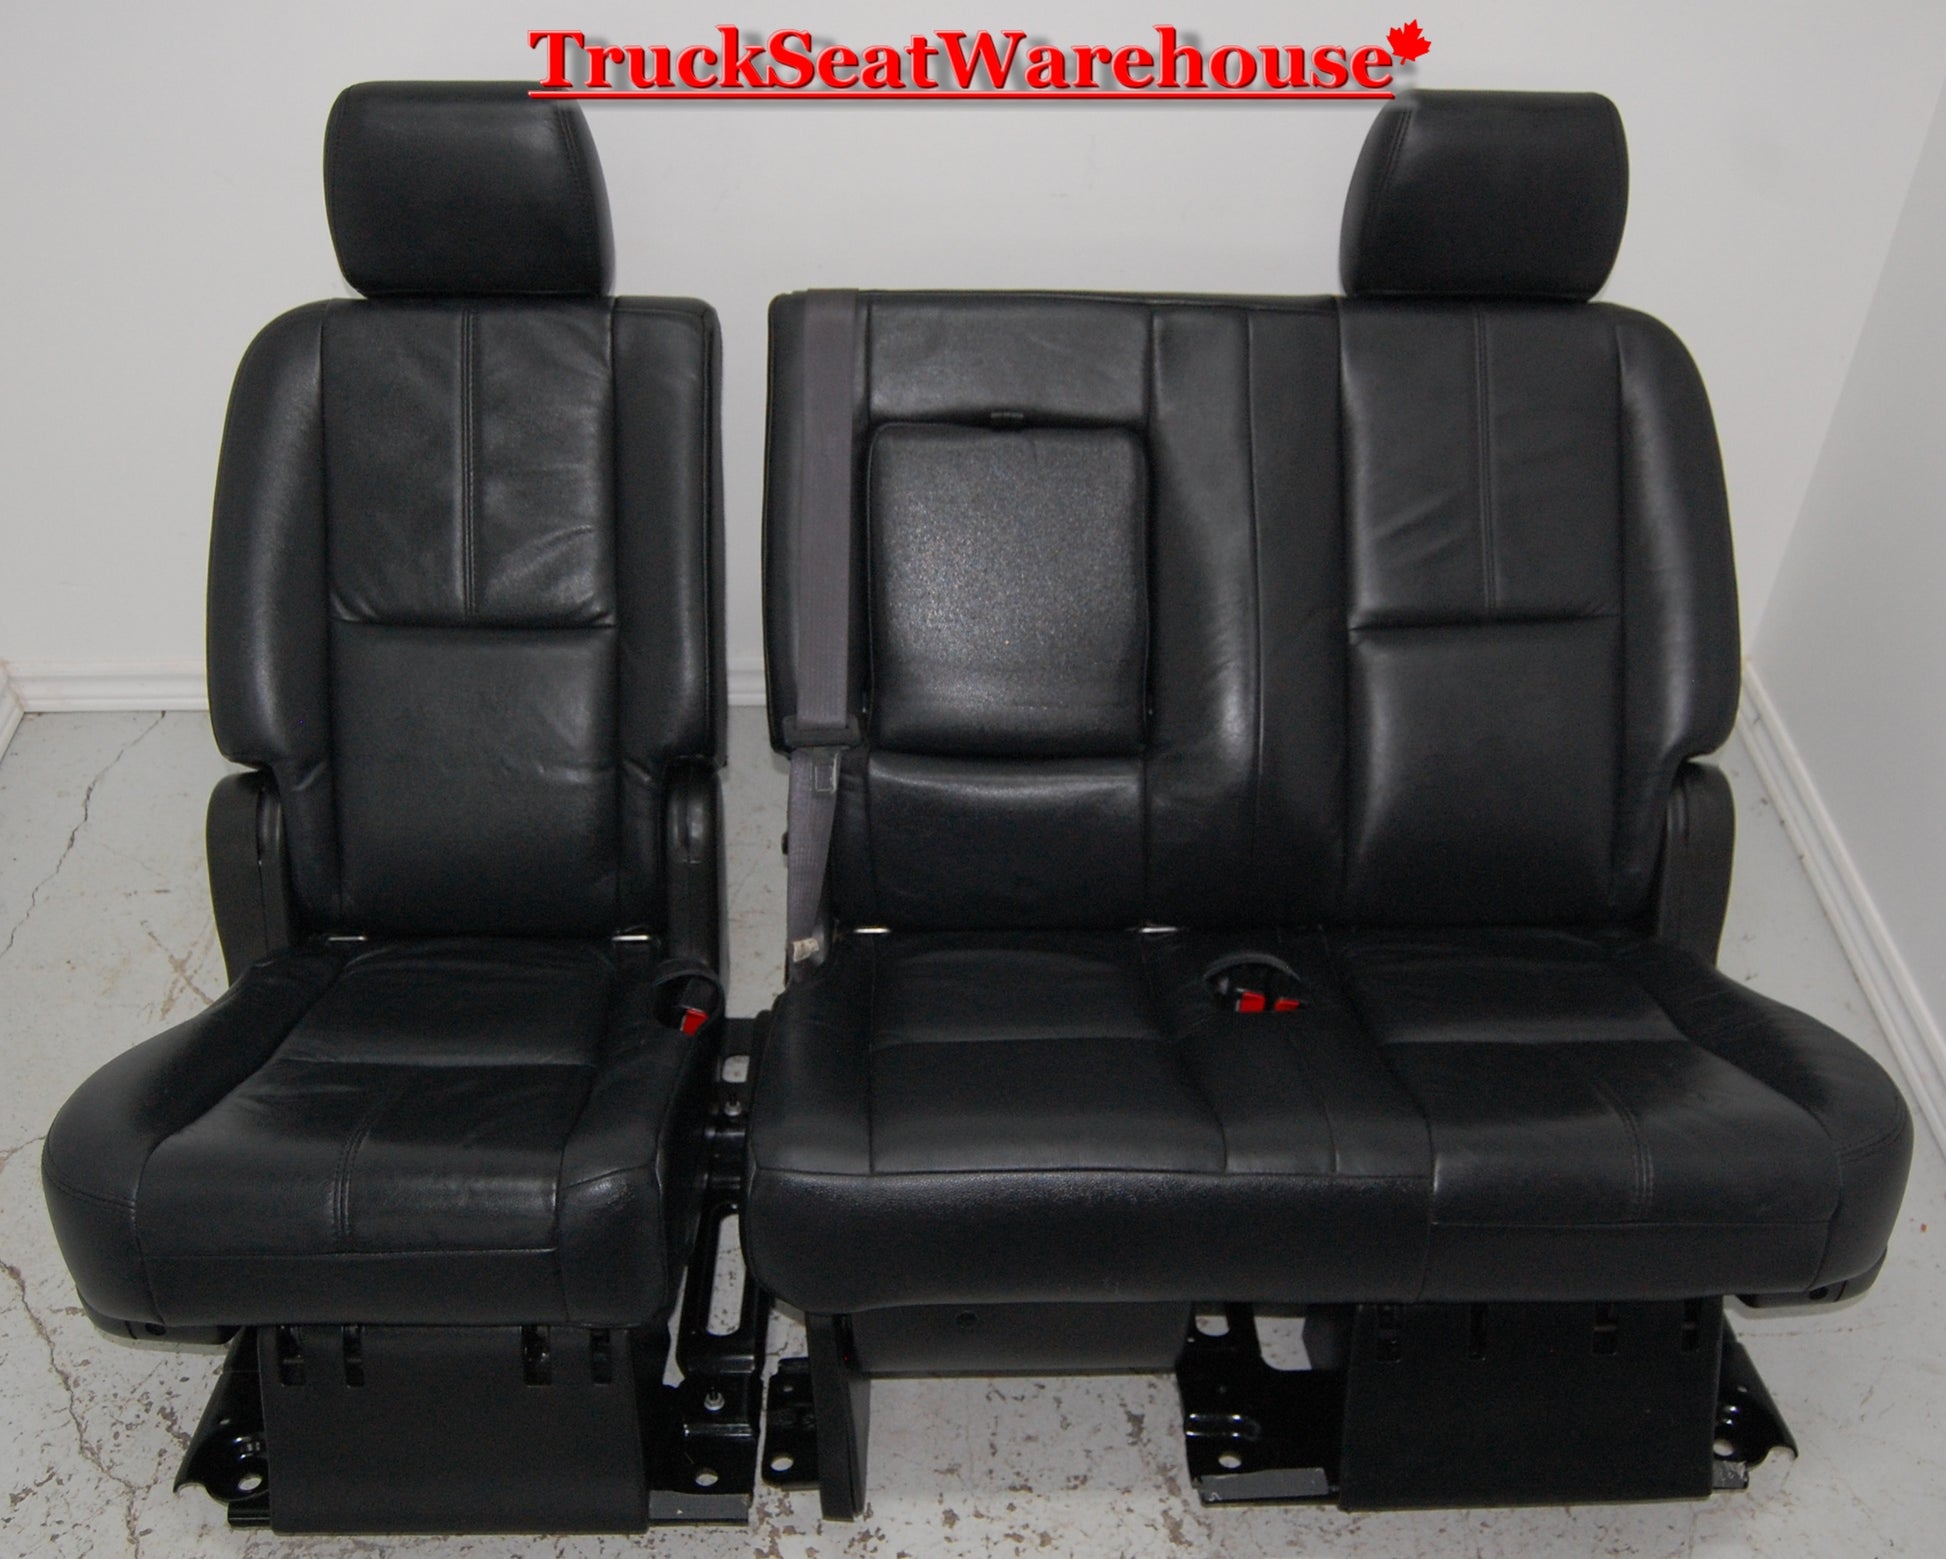 Black leather second row bench seat will fit 2007-14 style short GMC Yukon or Chev Tahoe, Denali or Escalade